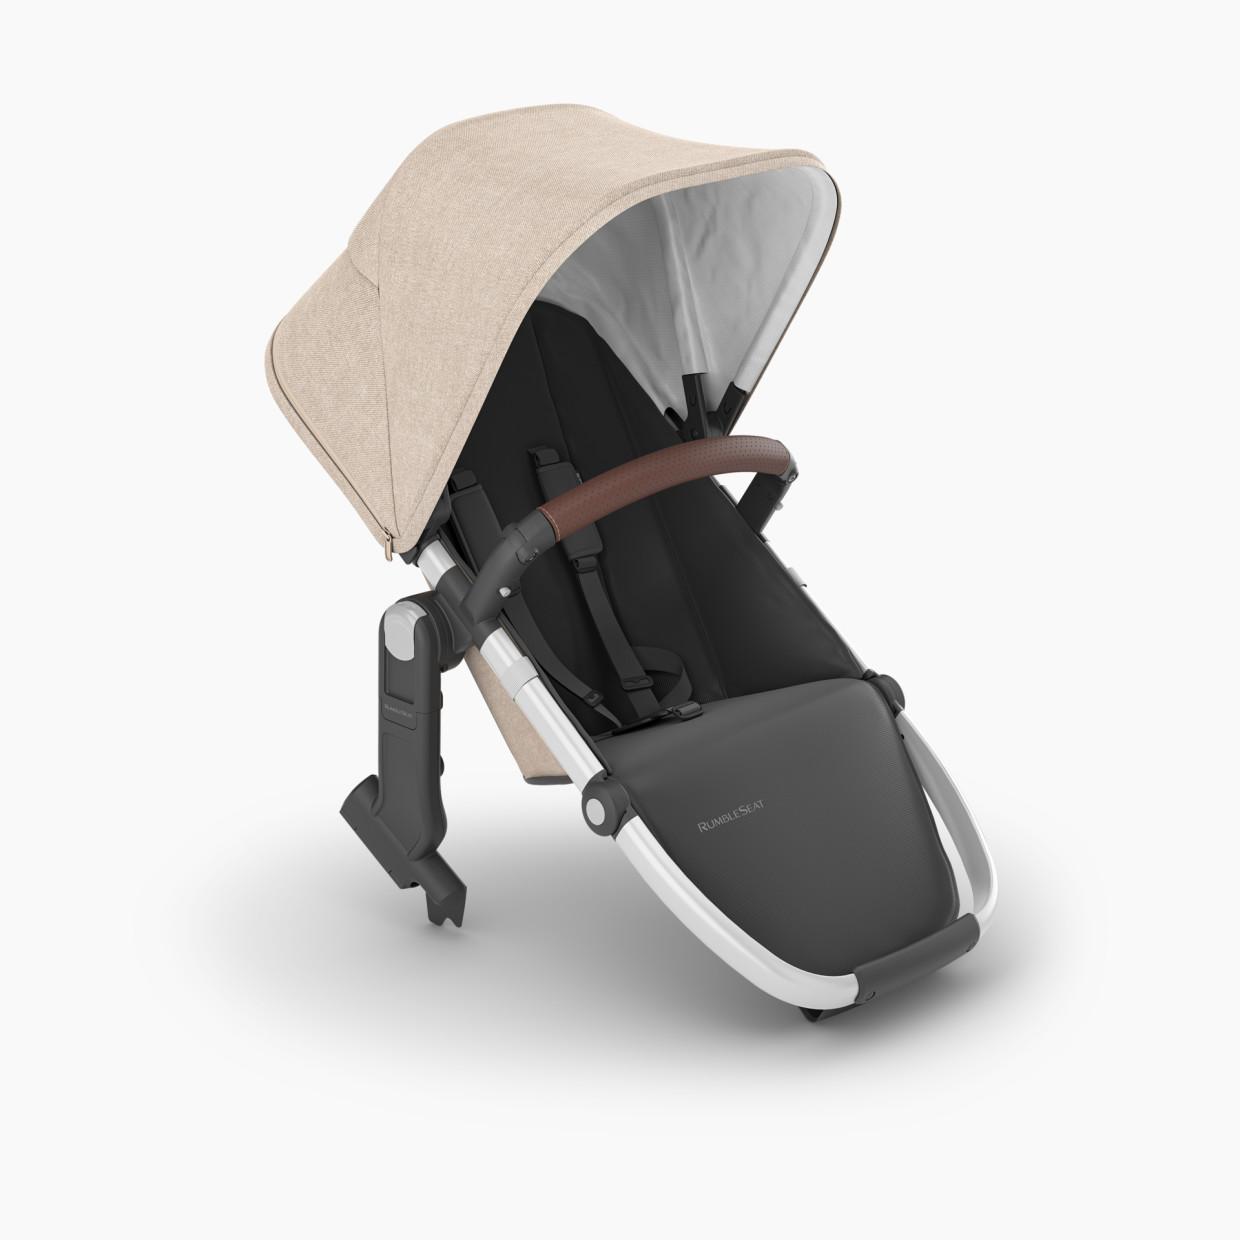 UPPAbaby RumbleSeat V2+ - Declan.